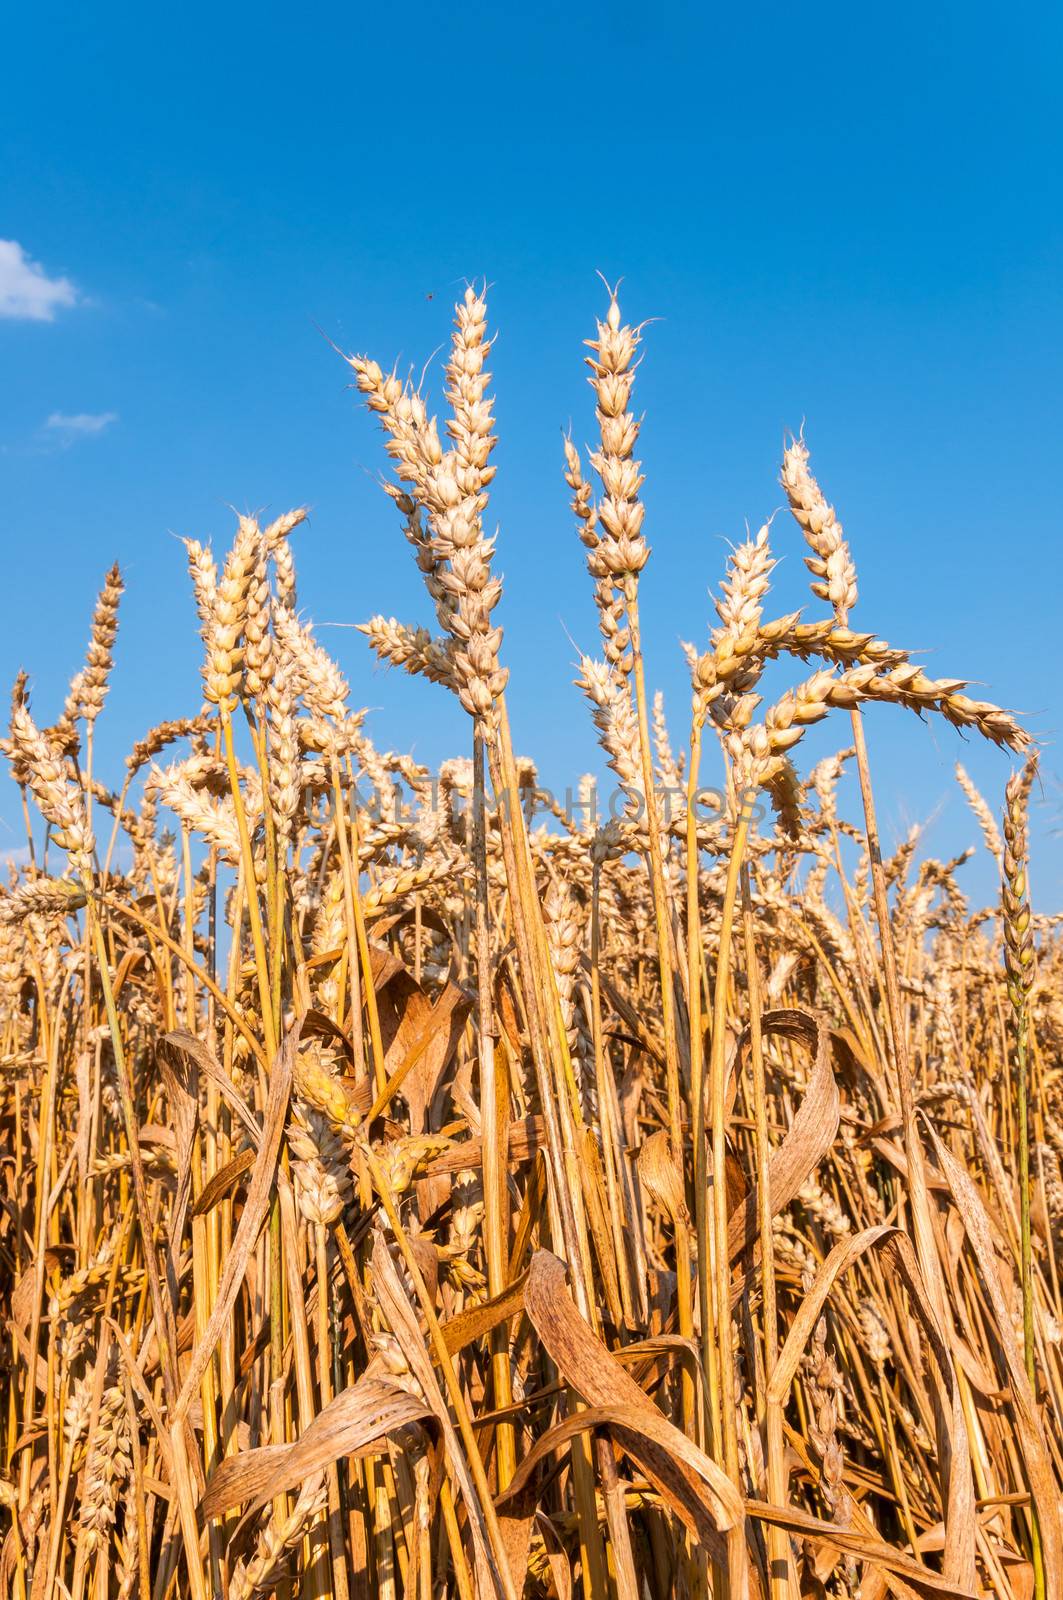 Wheat field with blue sky in background (vertical)